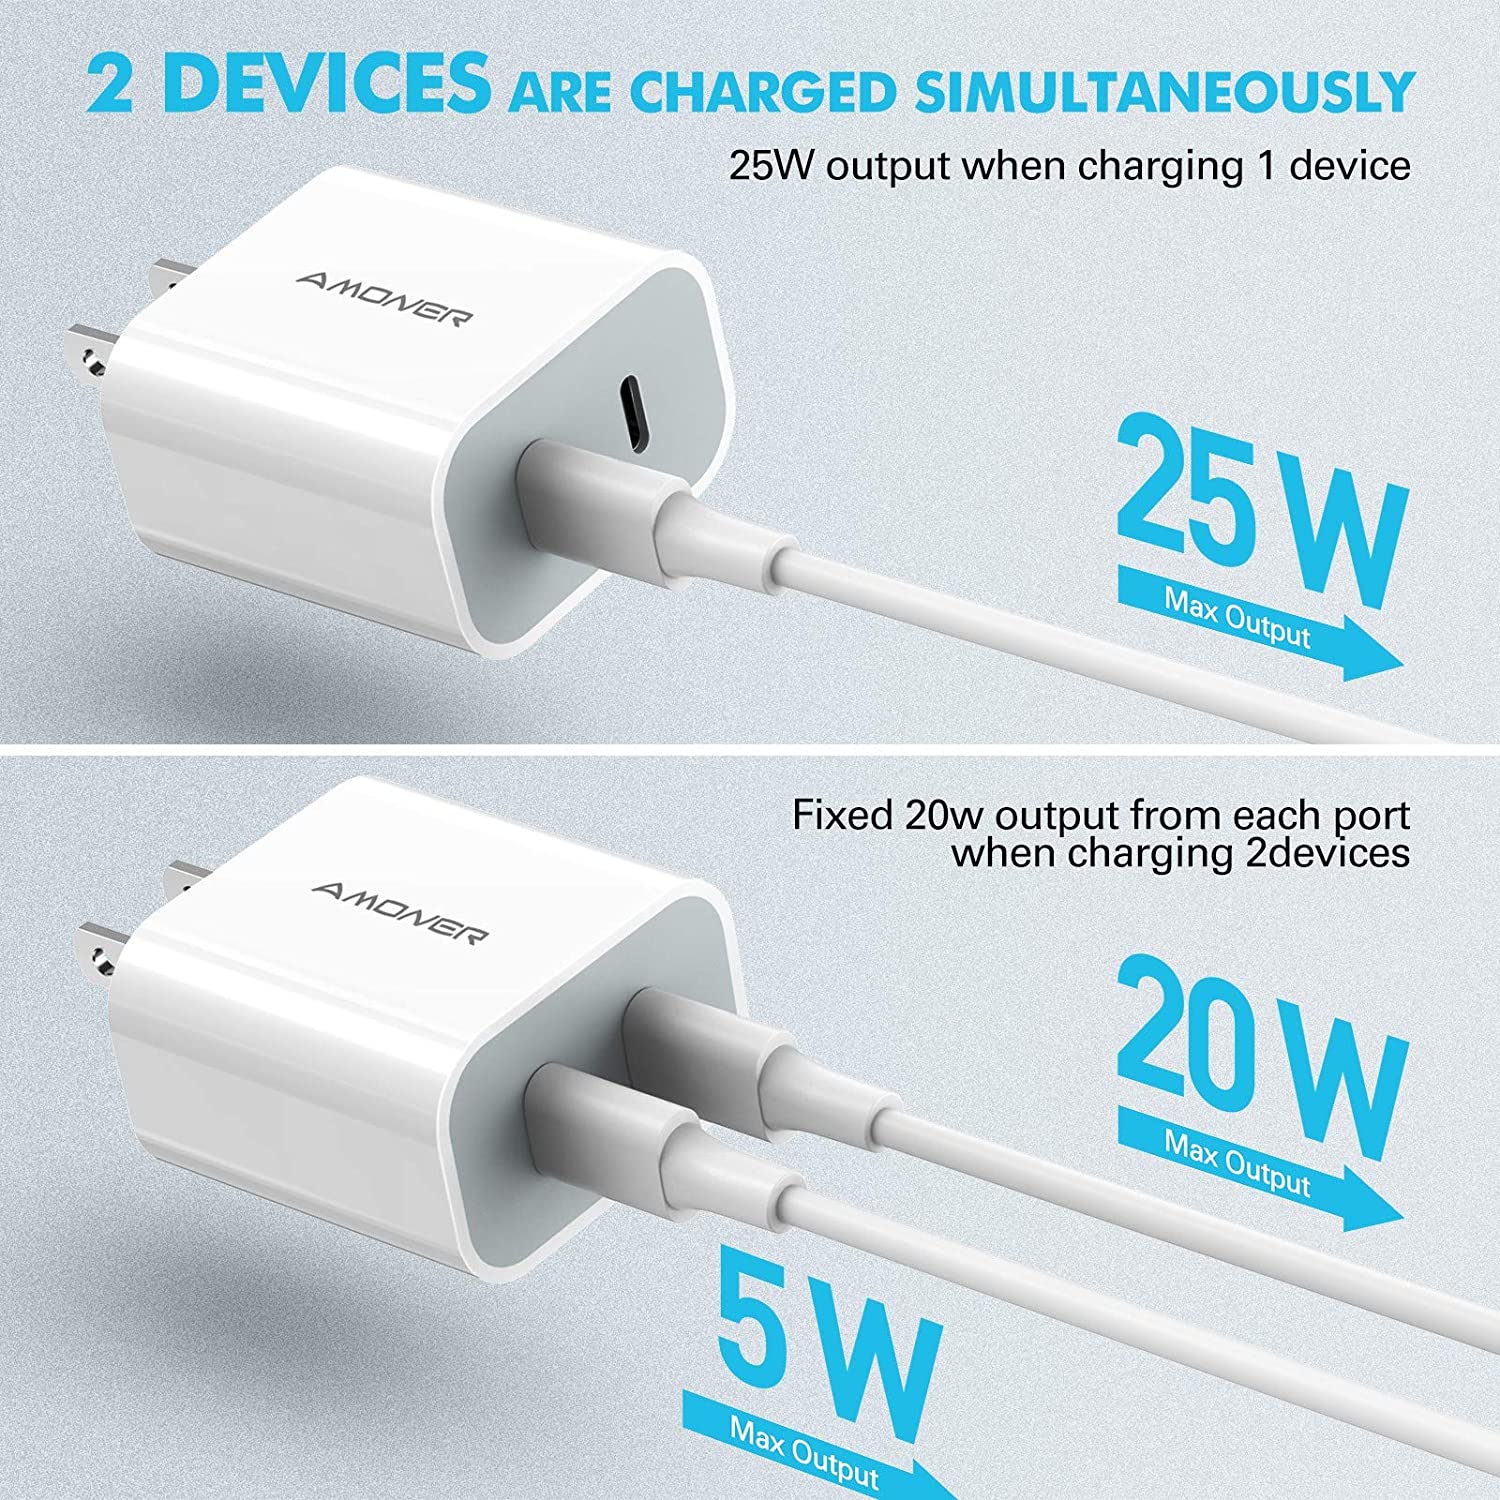 Iphone Charger Amoner Usb C Charger 2 Ports 25w Iphone 12 Pro Max Ch Amoner Powerful Energy Provider